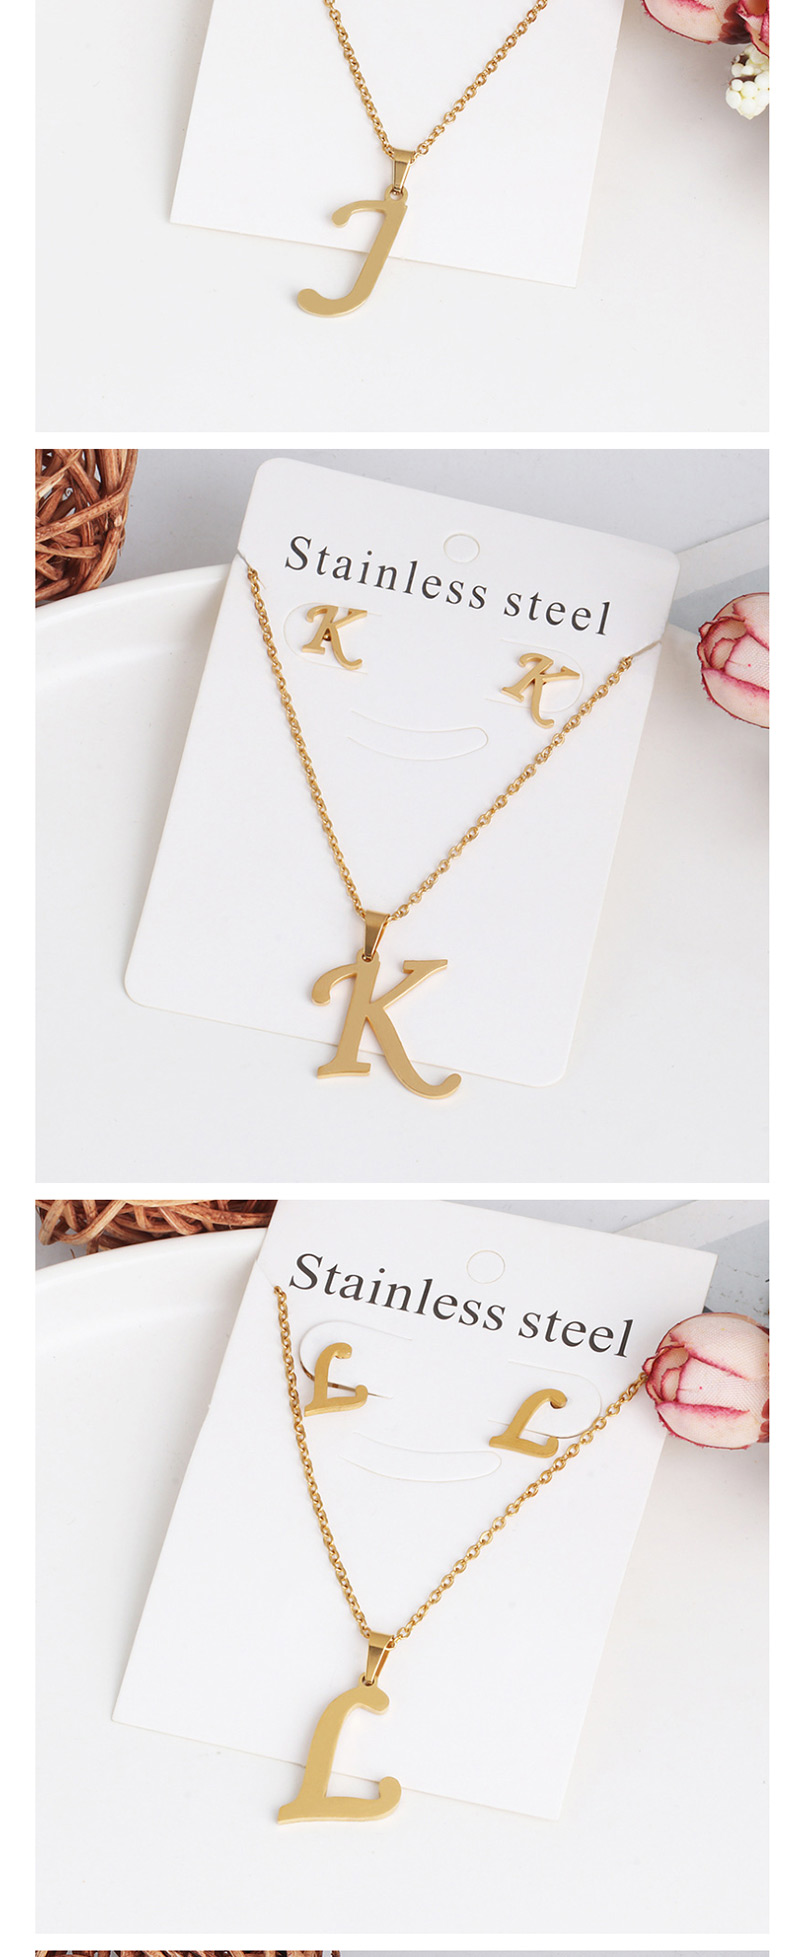 Fashion H Golden Stainless Steel Letter Necklace Earrings Two-piece,Jewelry Sets